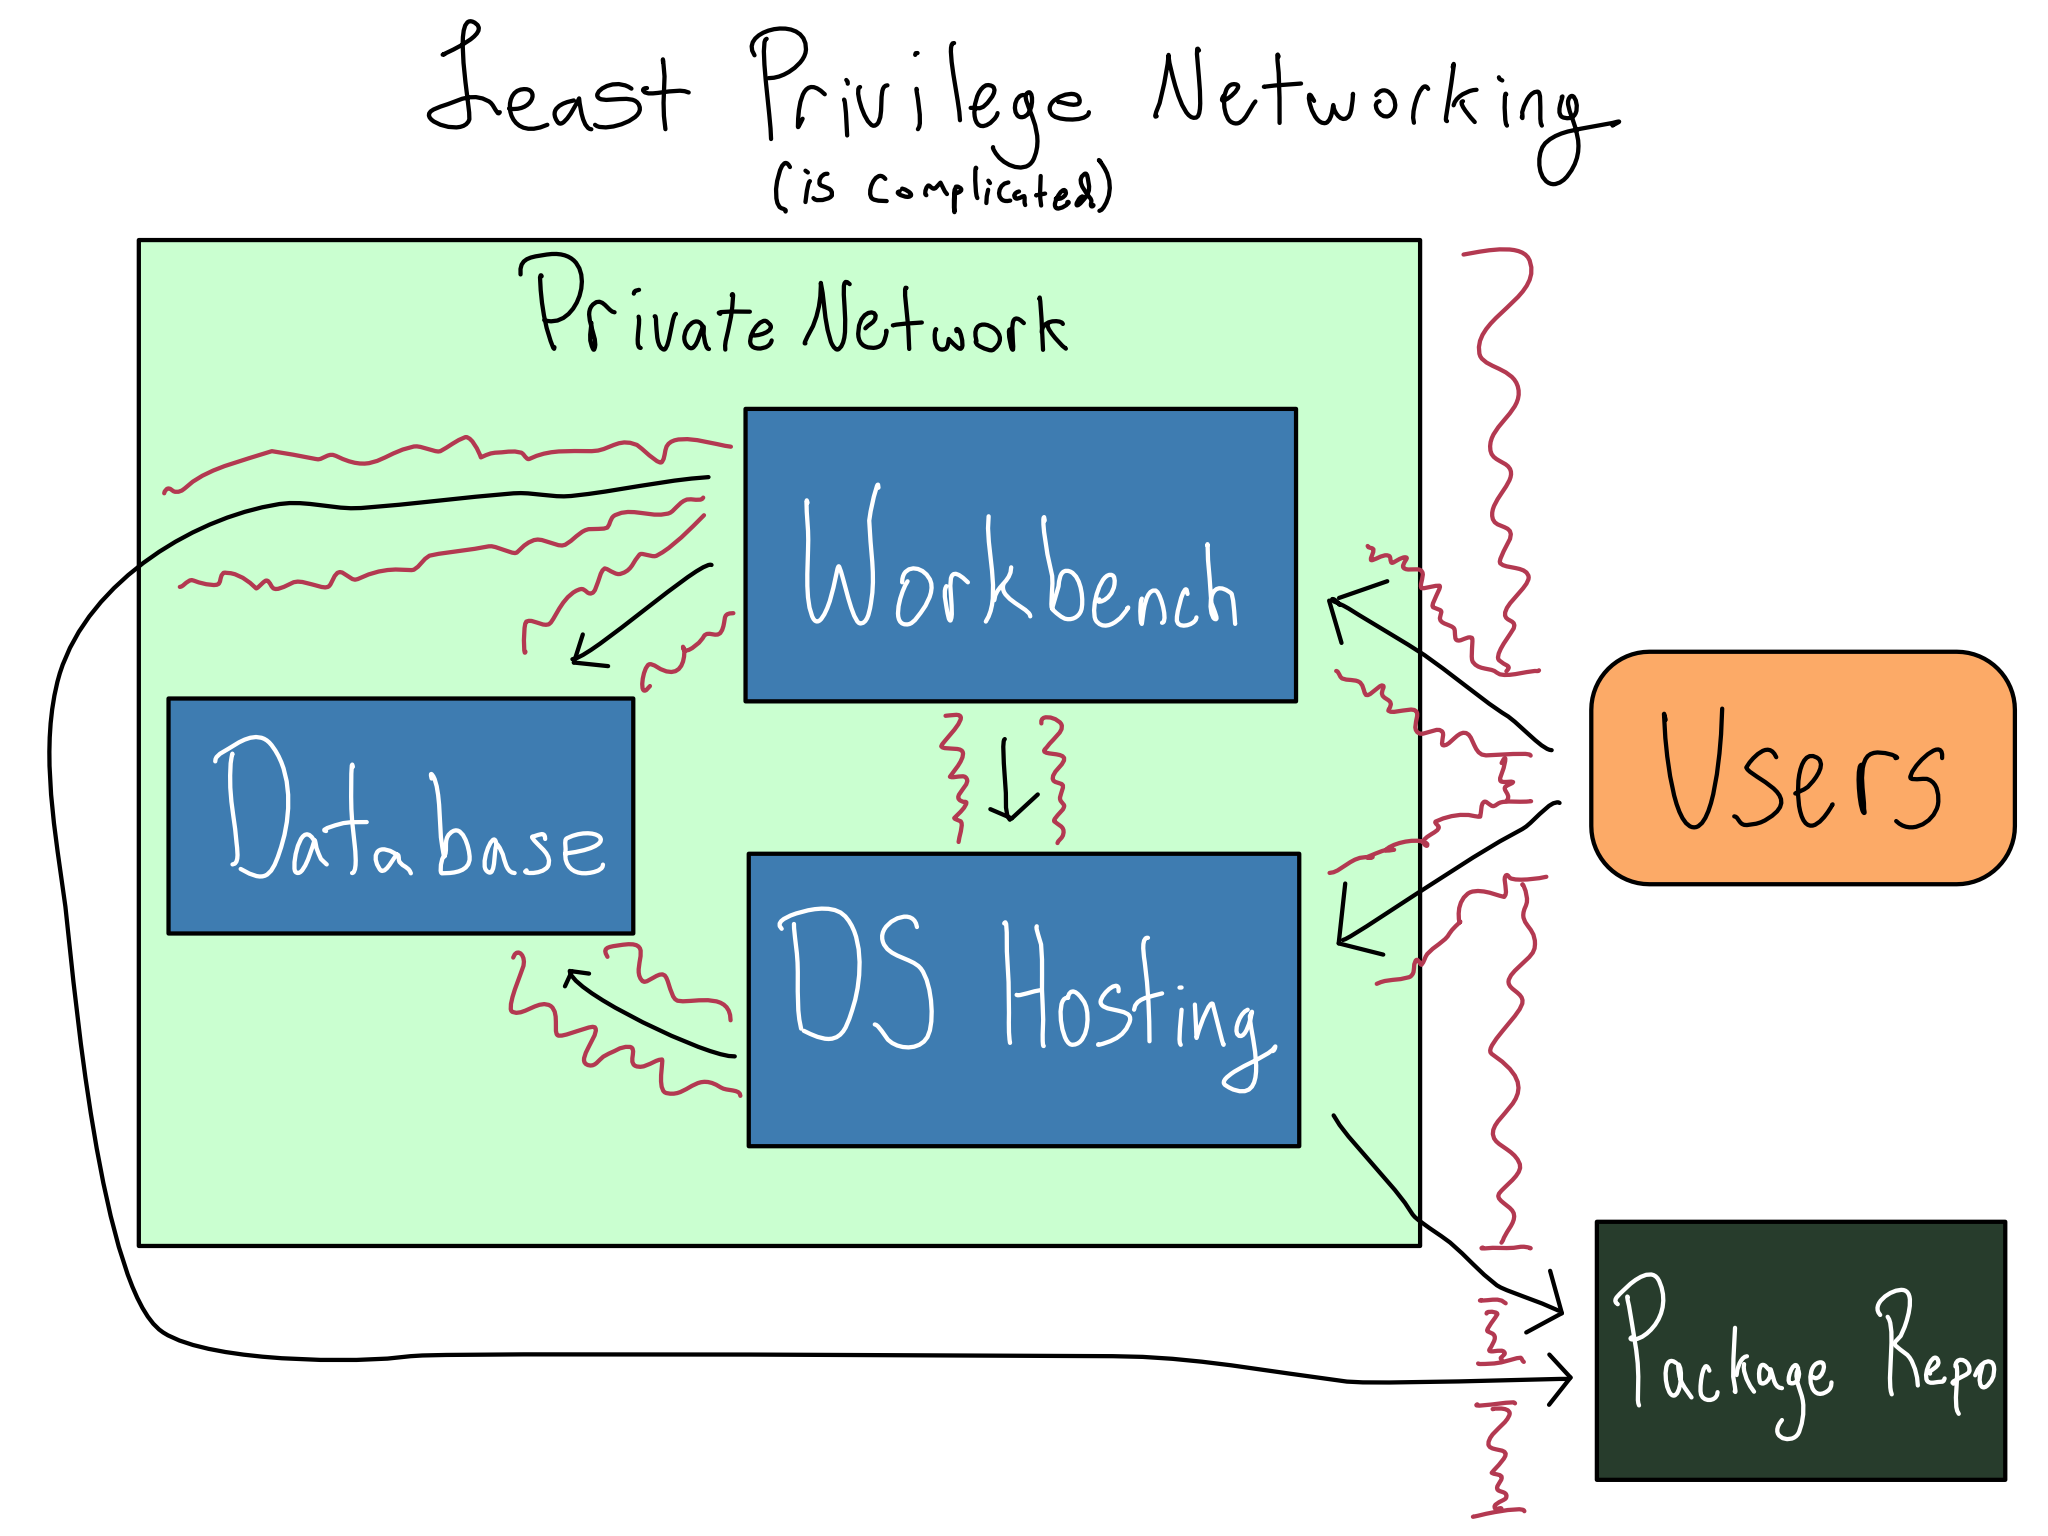 A picture of traffic coming into a private network from laptops going to a workbench. There's a connection from the workbench to a database and package repository, but only to there.